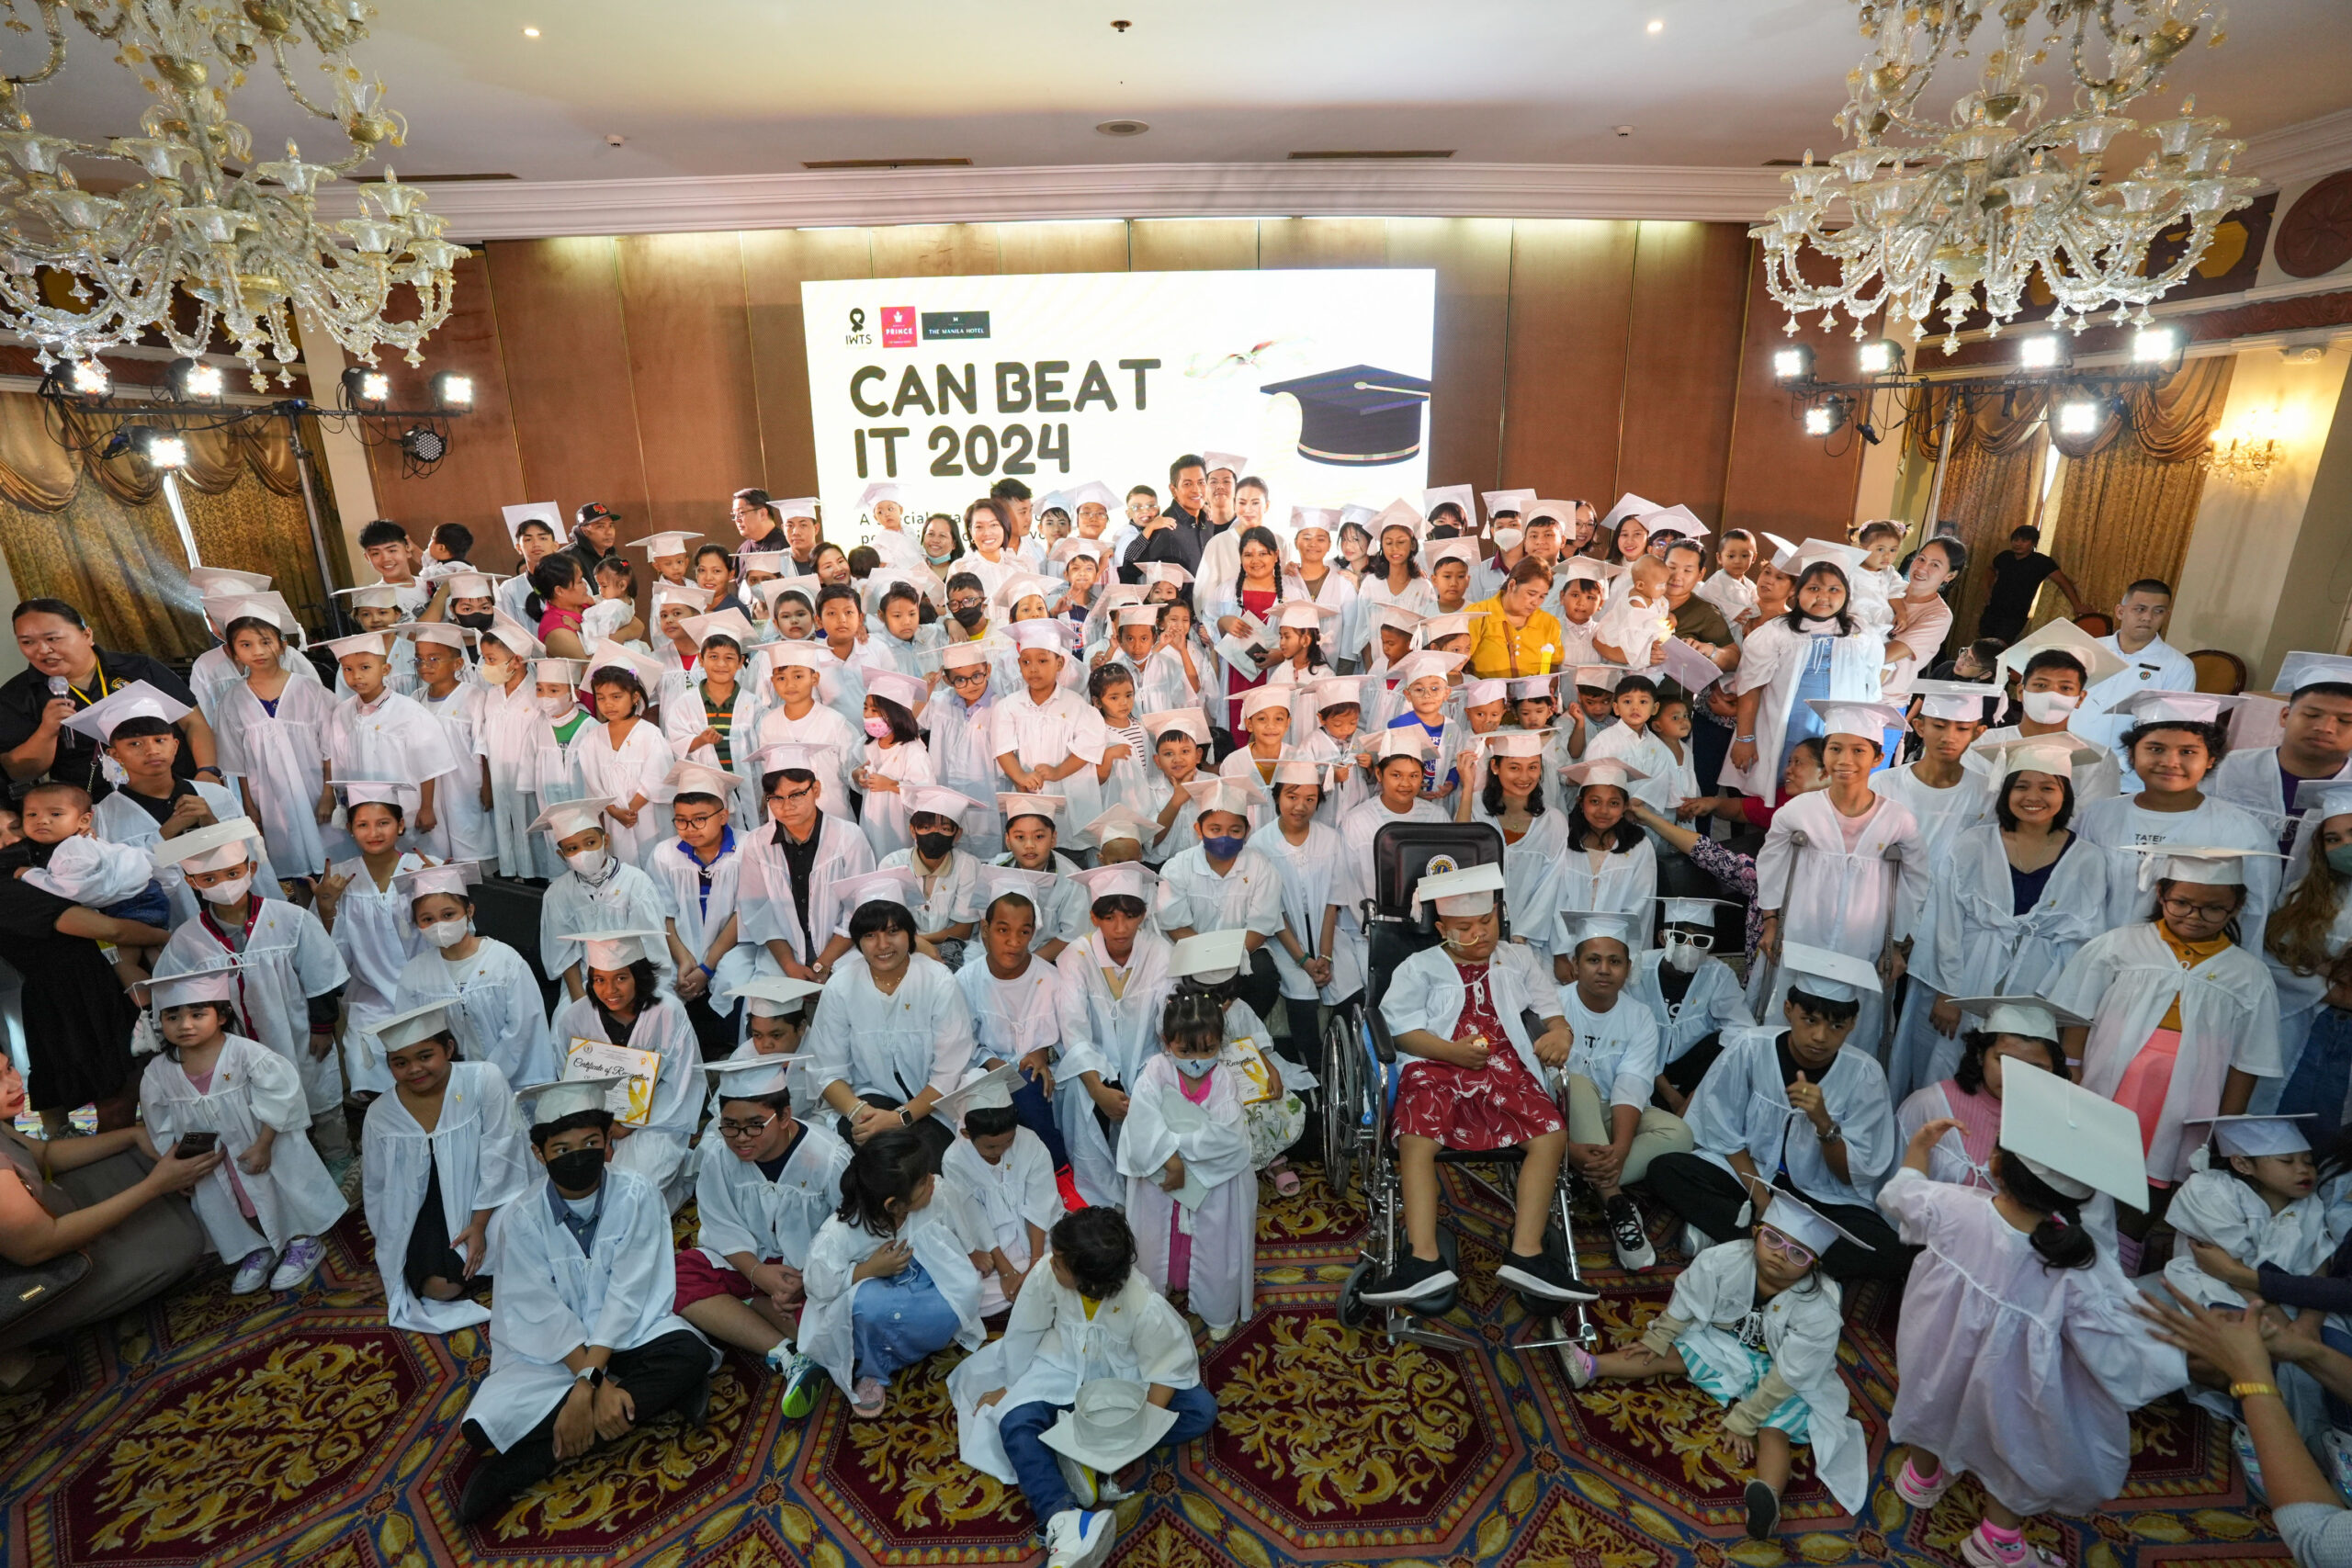 CAn BEAT IT: 150 STORIES OF COURAGE AND TRIUMPH I Want To  Share Foundation&#8217;s Ceremony Celebrate Victory of Pediatric Cancer Patients